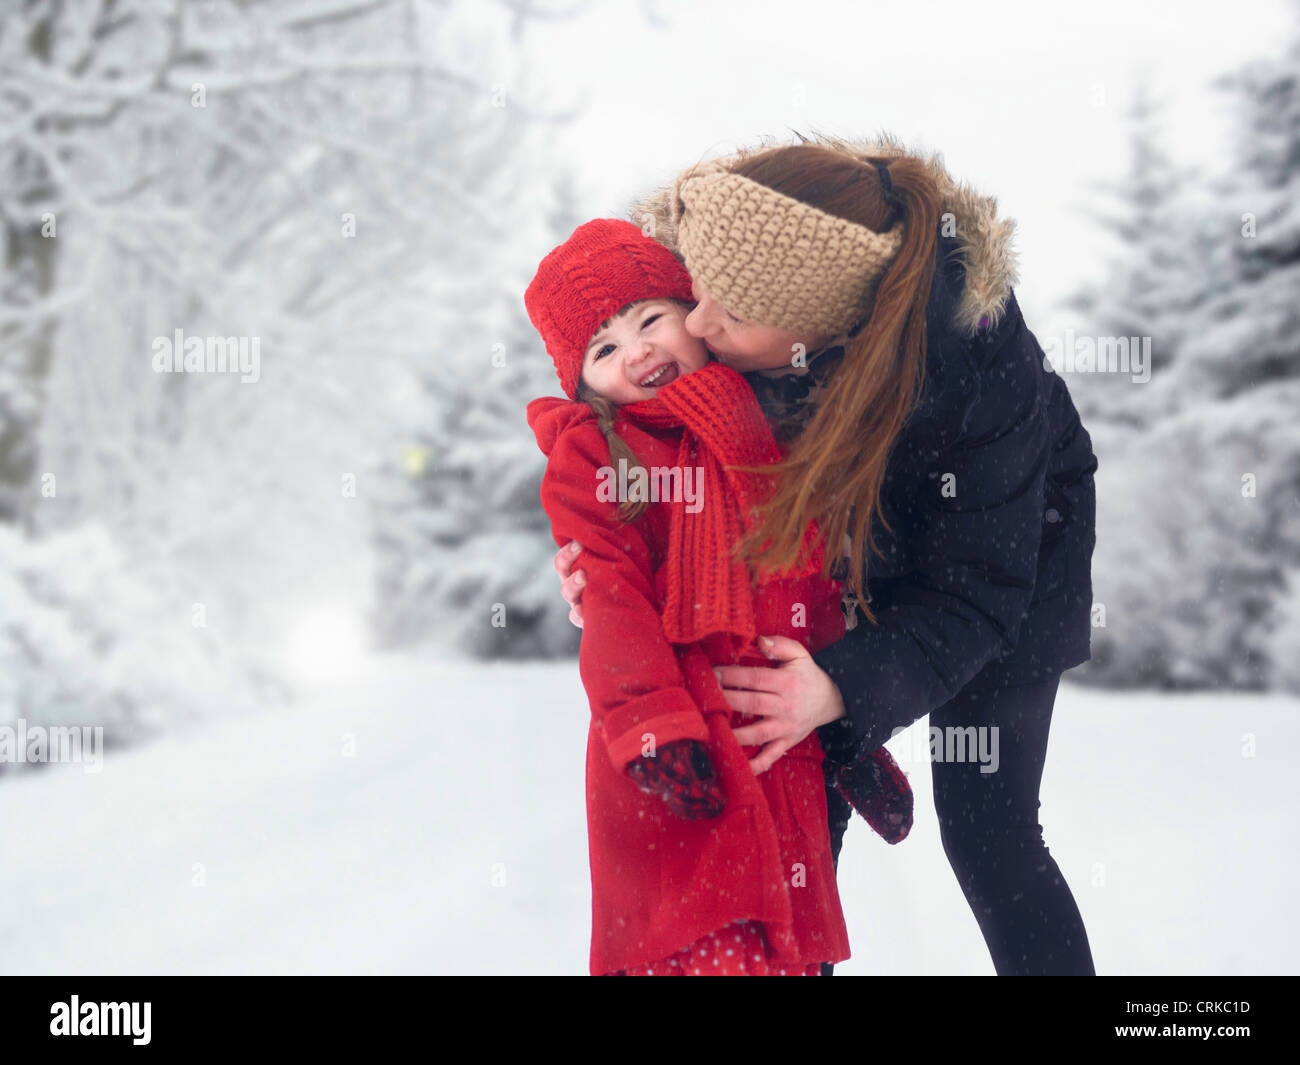 Mother and daughter kissing in snow Stock Photo